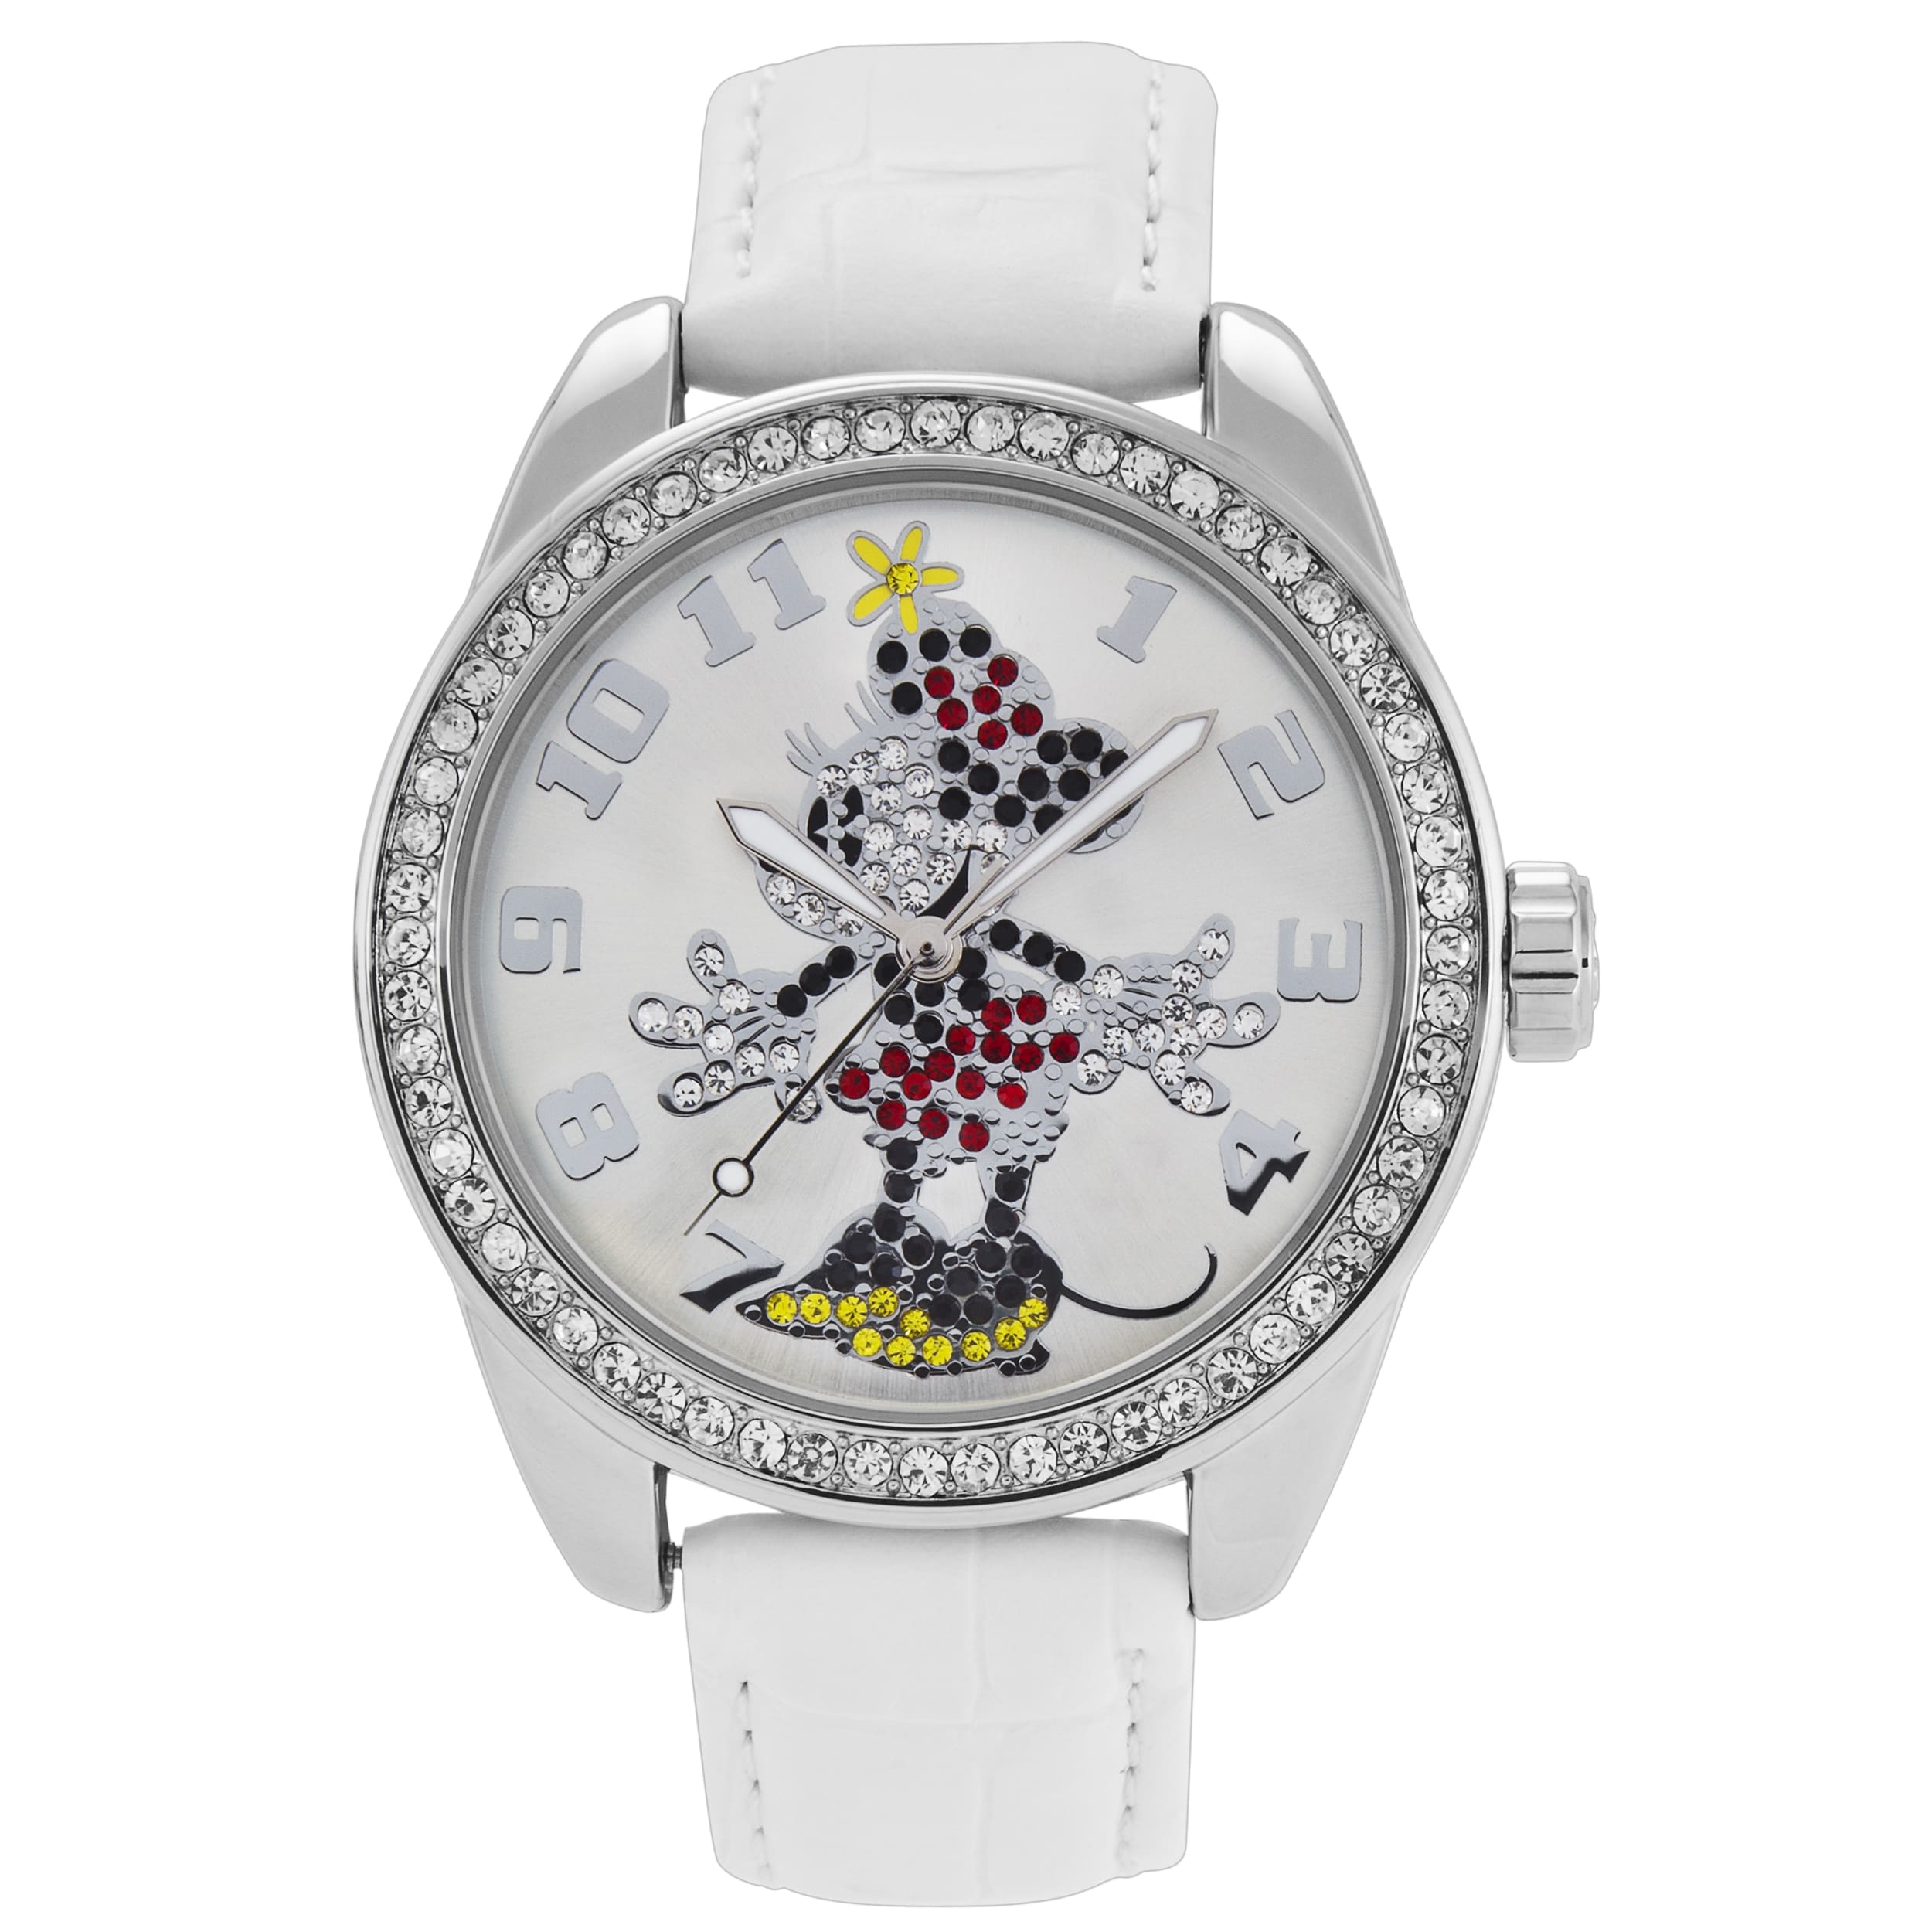 Disney Ingersoll Womens Minnie Mouse Diamante Watch Today $74.99 5.0